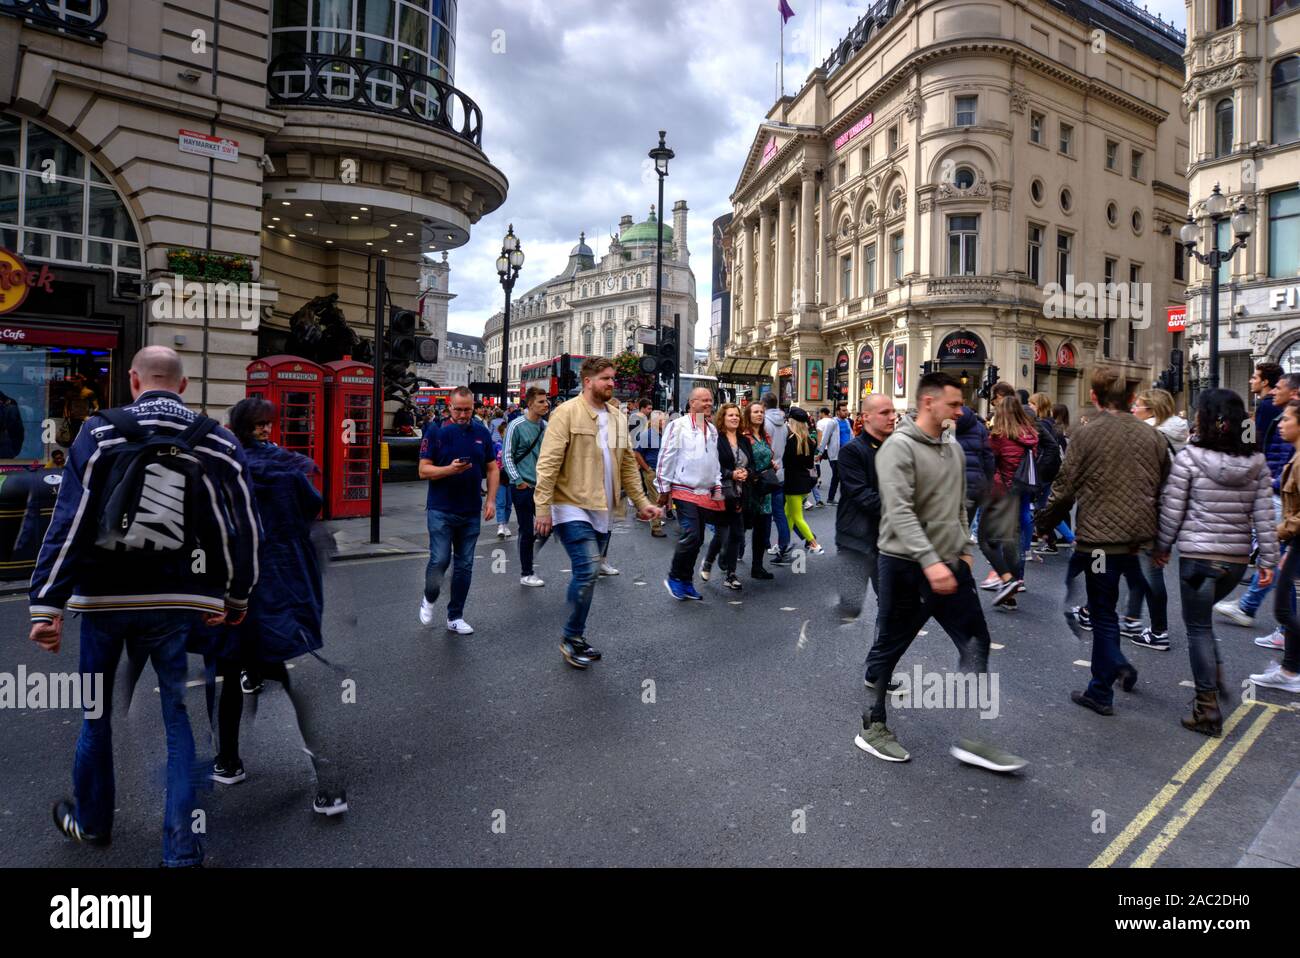 London, United Kingdom - September 7, 2019: Numerous motion blurred tourists crossing road in Haymarket in central London UK Stock Photo